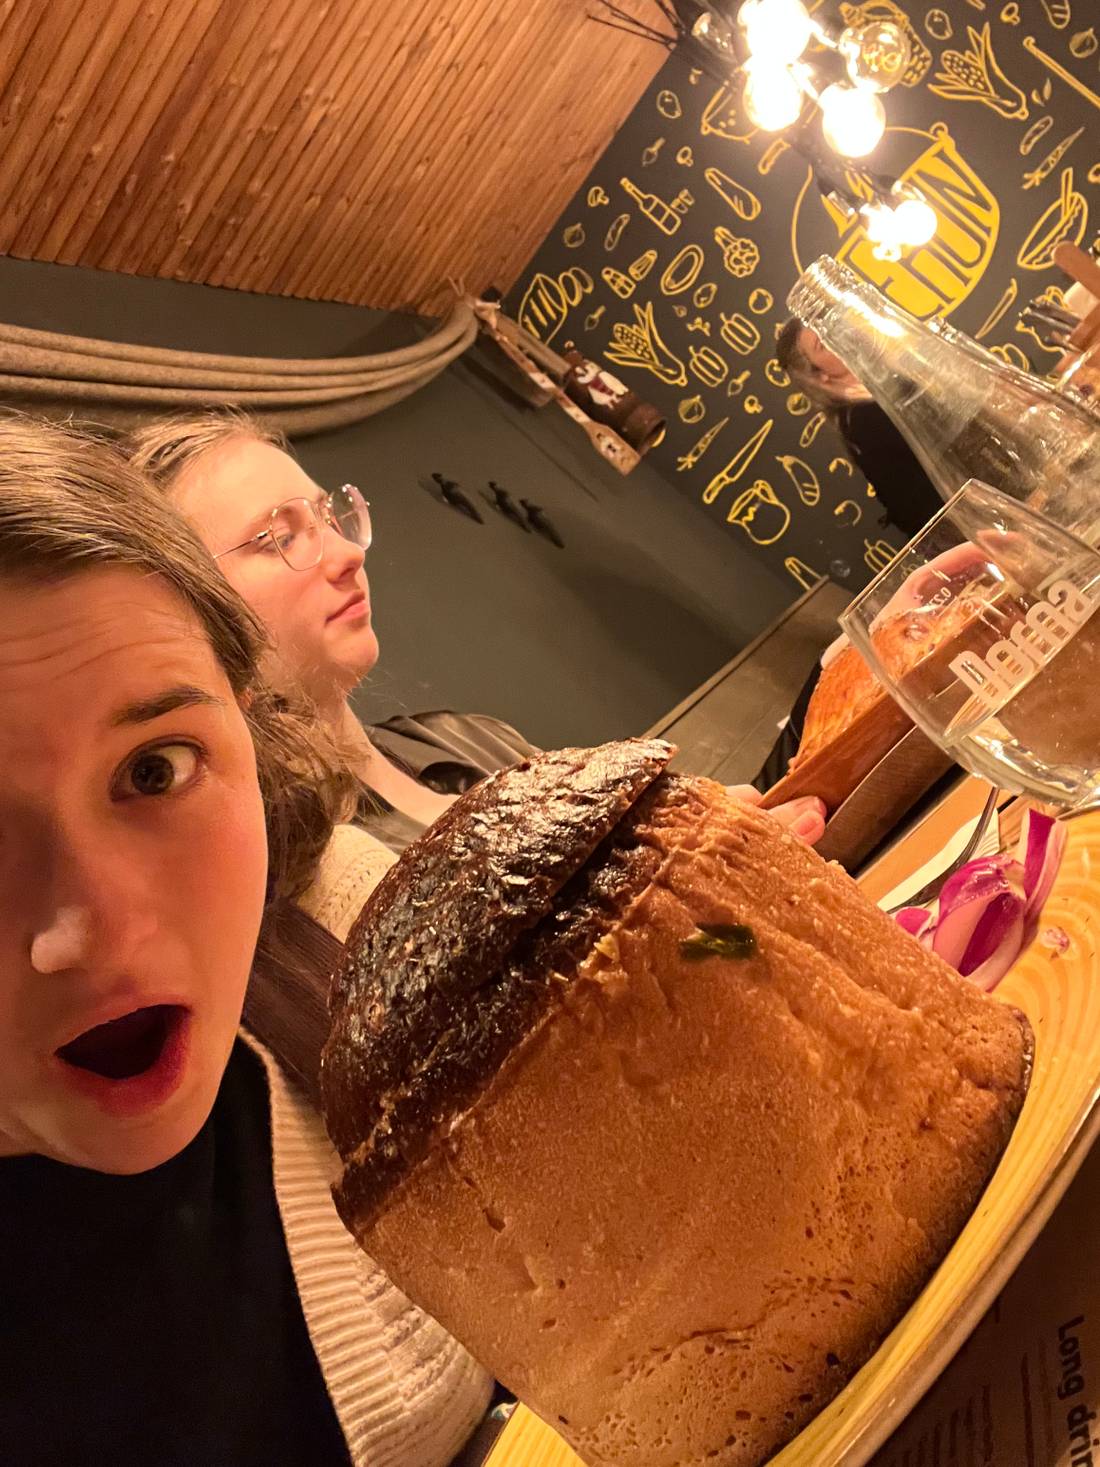 Me with the bread bowl at La Ceaun. It means ”The Cauldron” in Romanian.